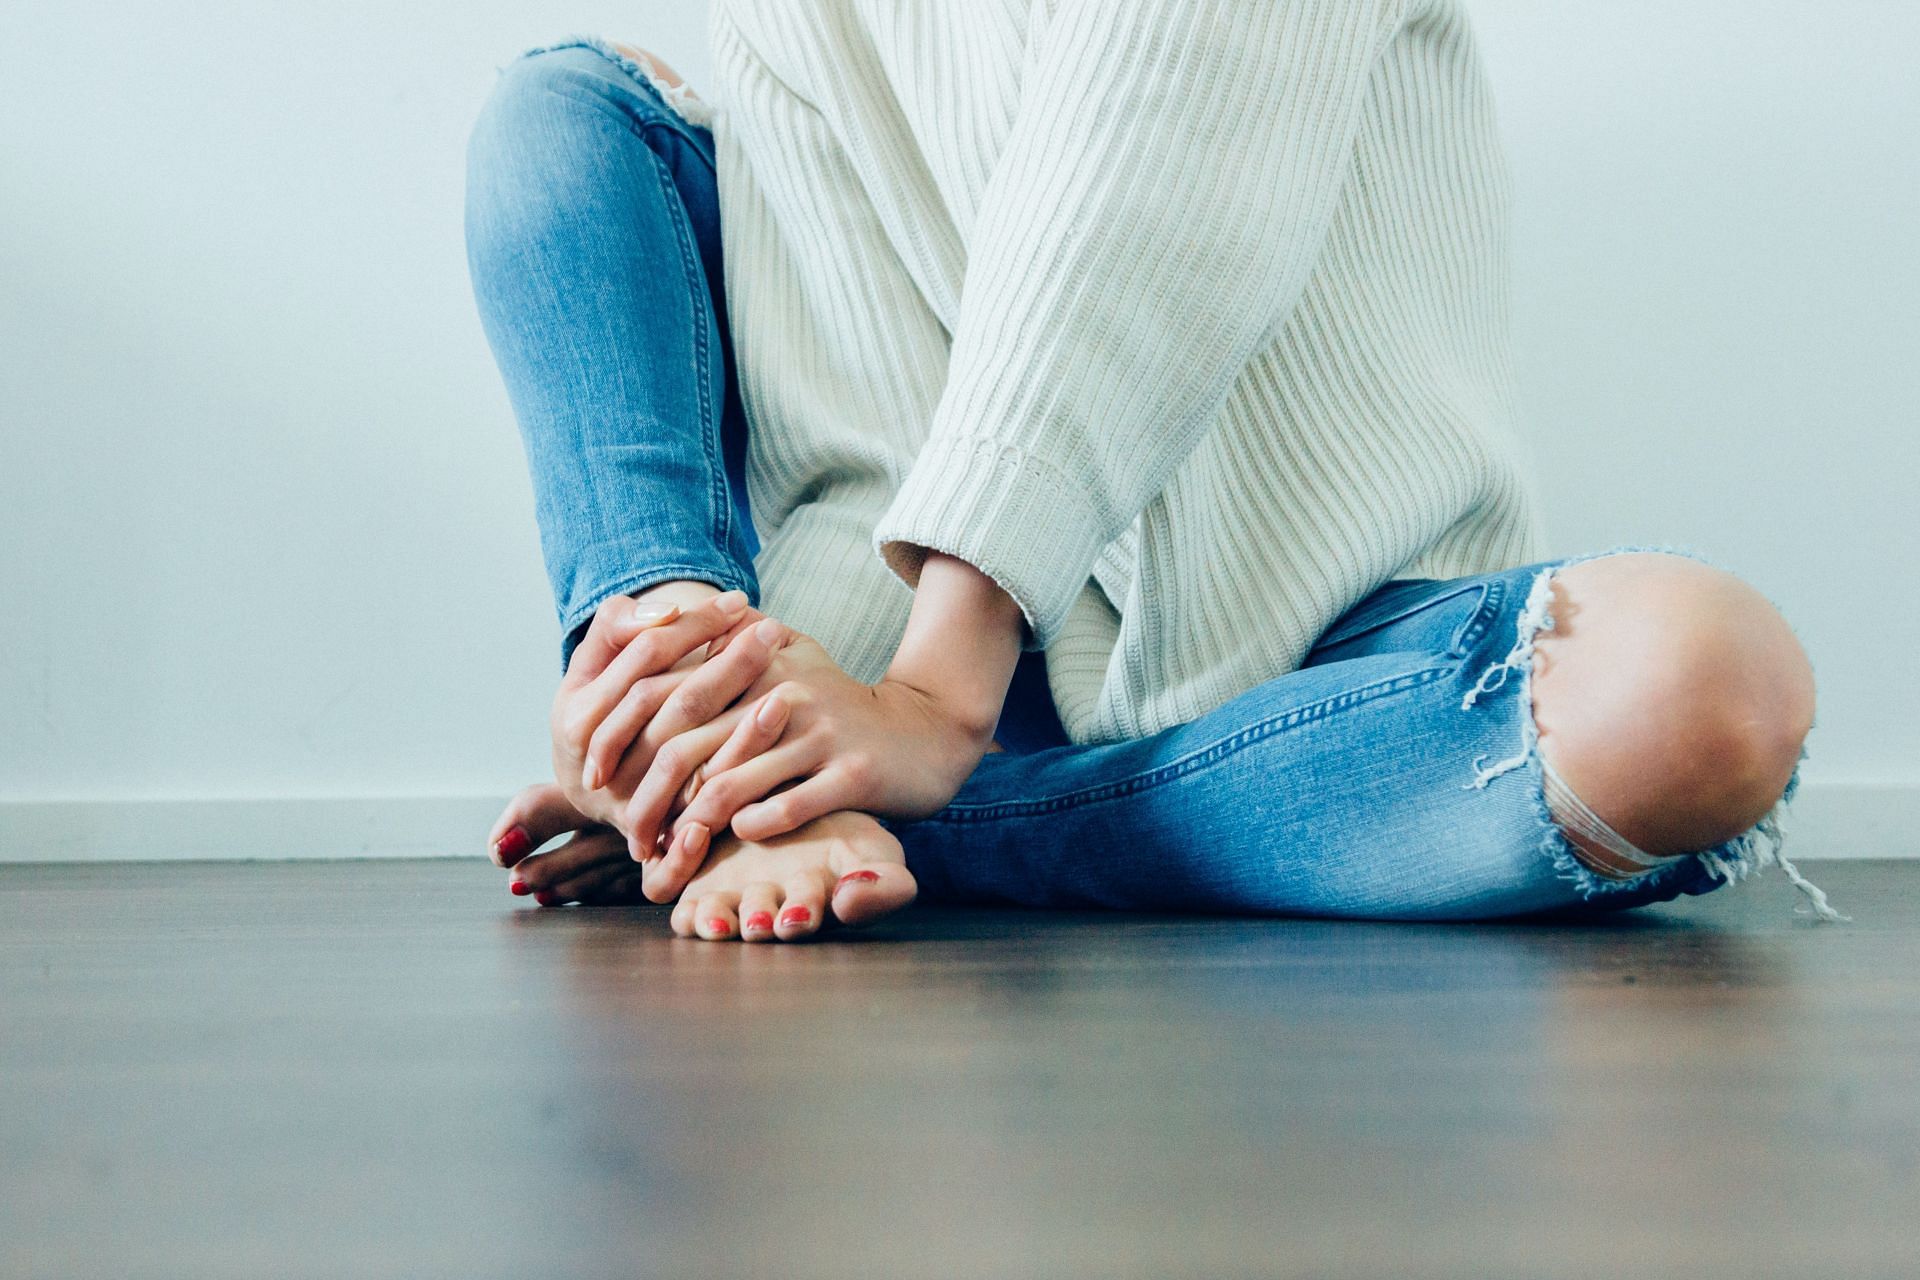 Foot pain can come from a variety of sources. (Image via Unsplash / Imani Bahati )